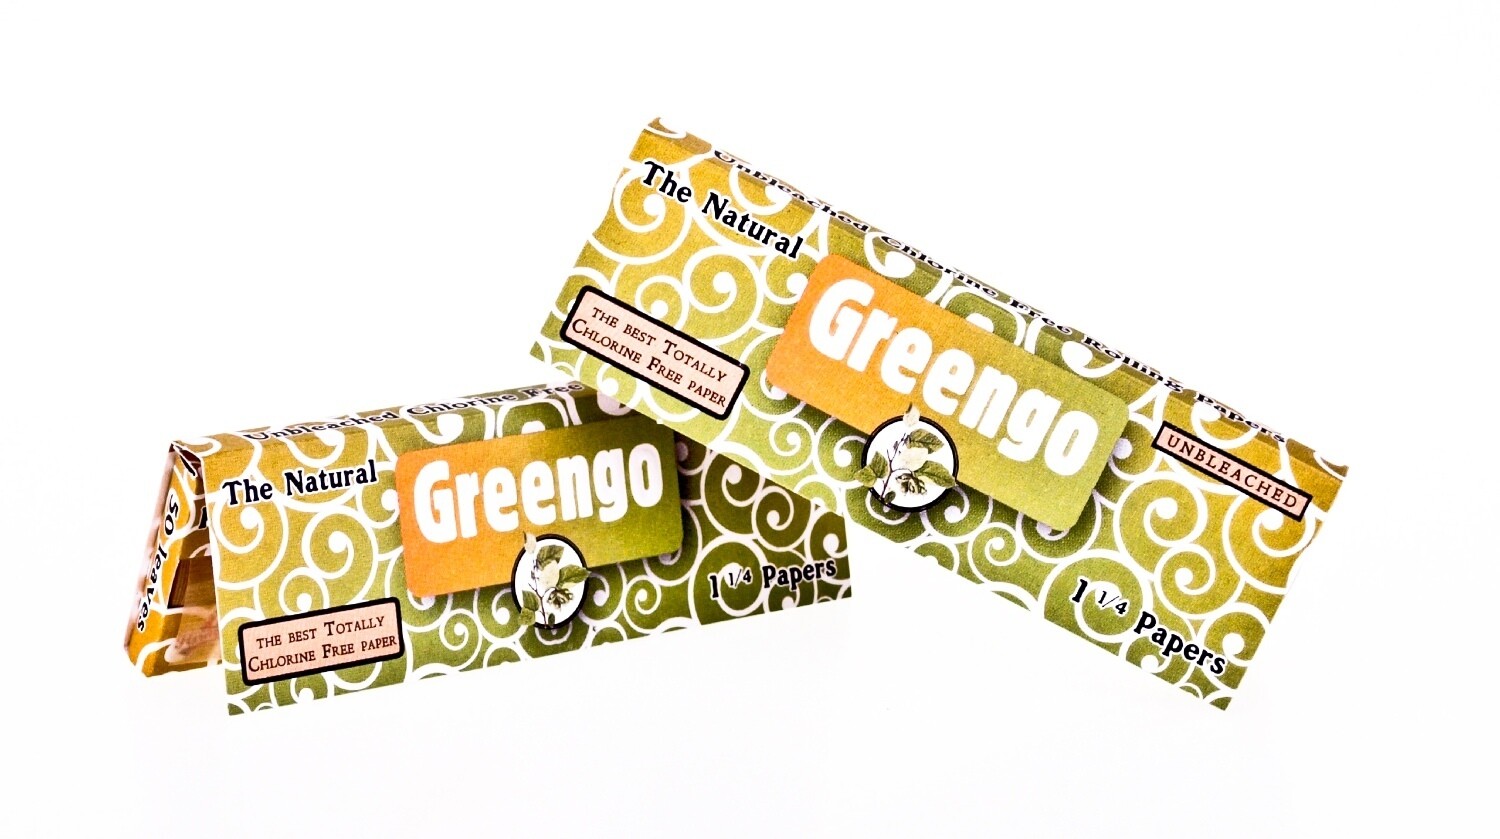 'Greengo' Papers 1 1/4 Size unbleached